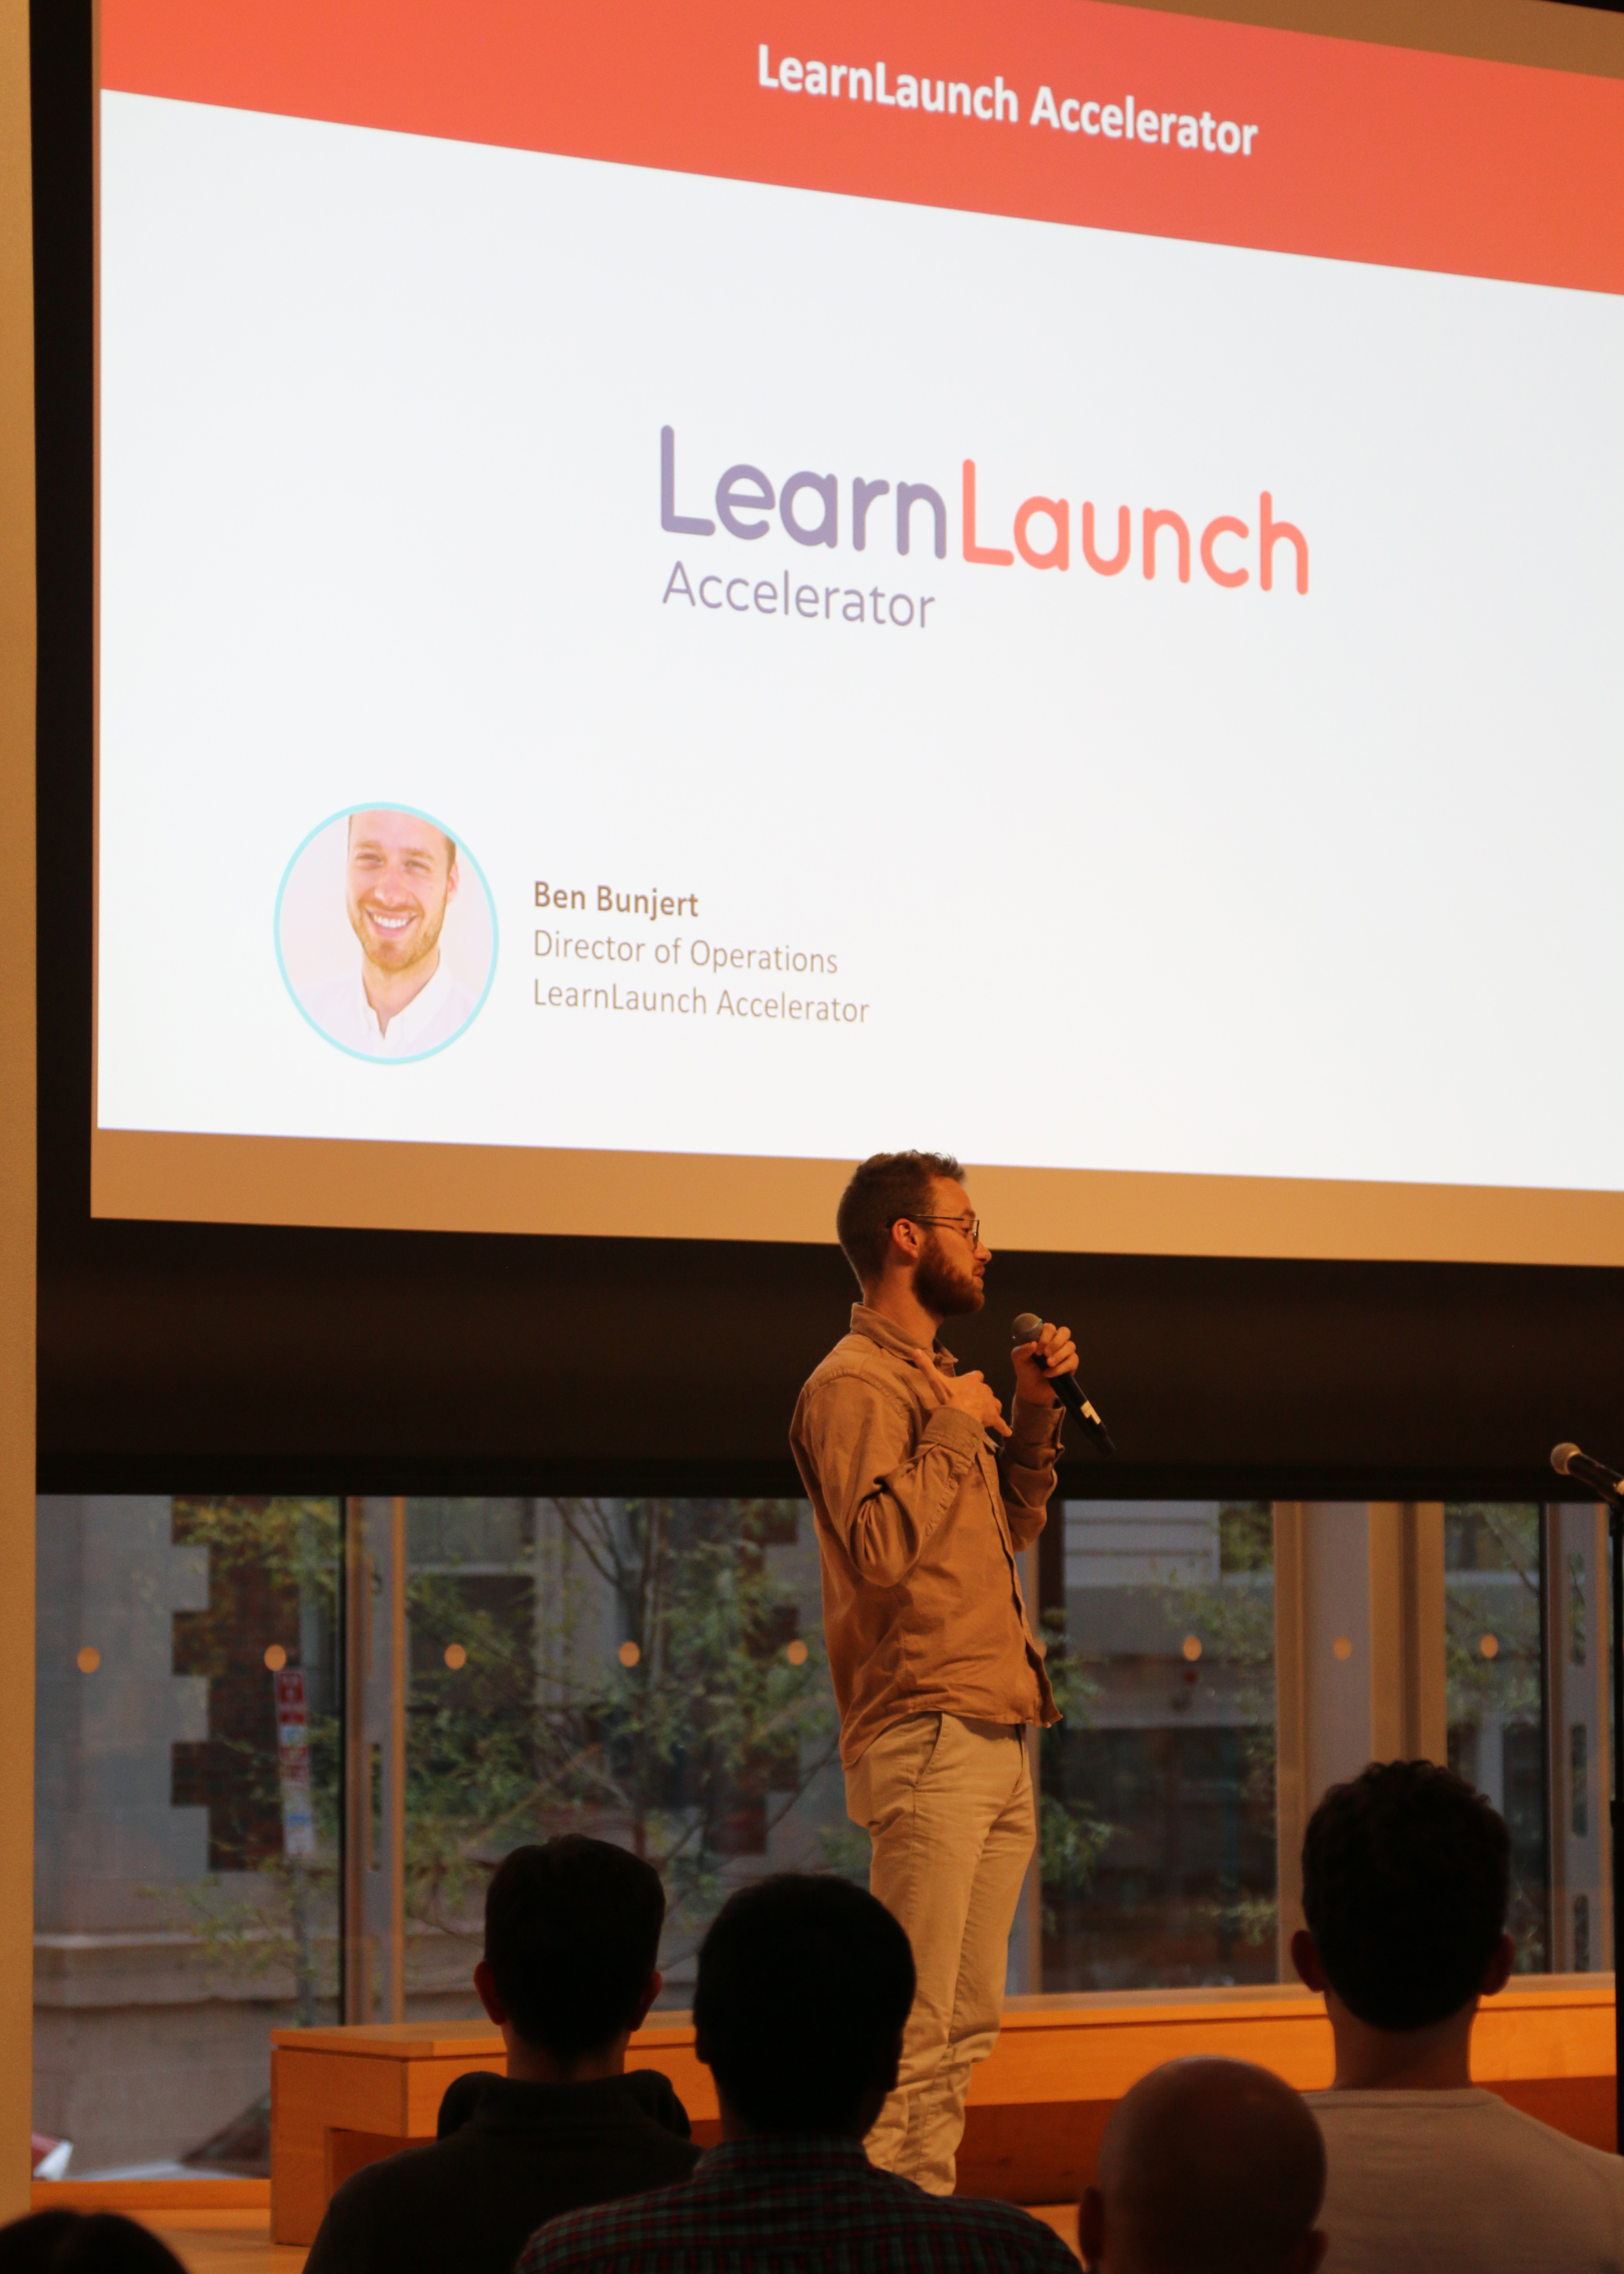 Photo of LearnLaunch presenting about what they offer